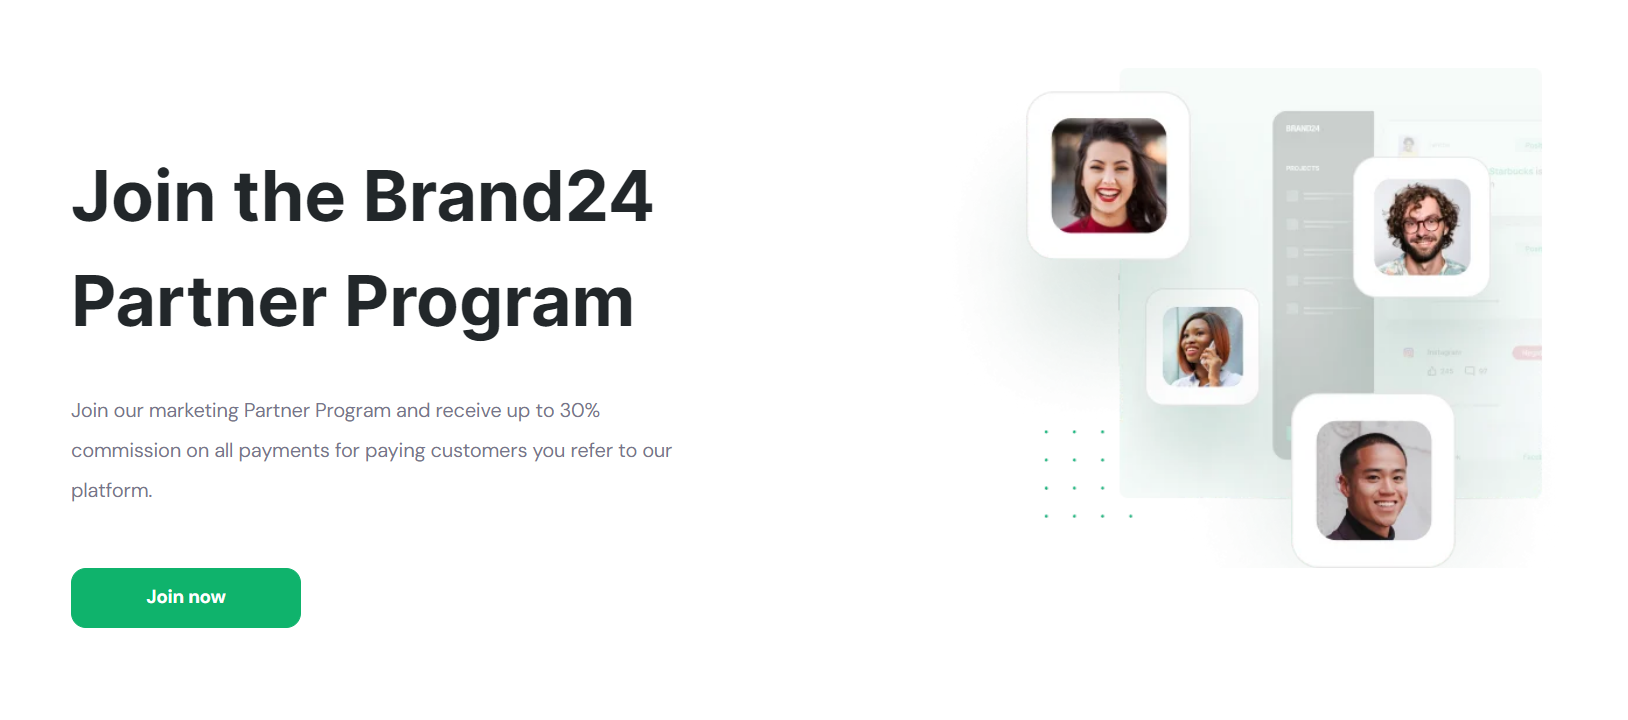 Brand24 affiliate program offers a recurring commission of up to 30%.